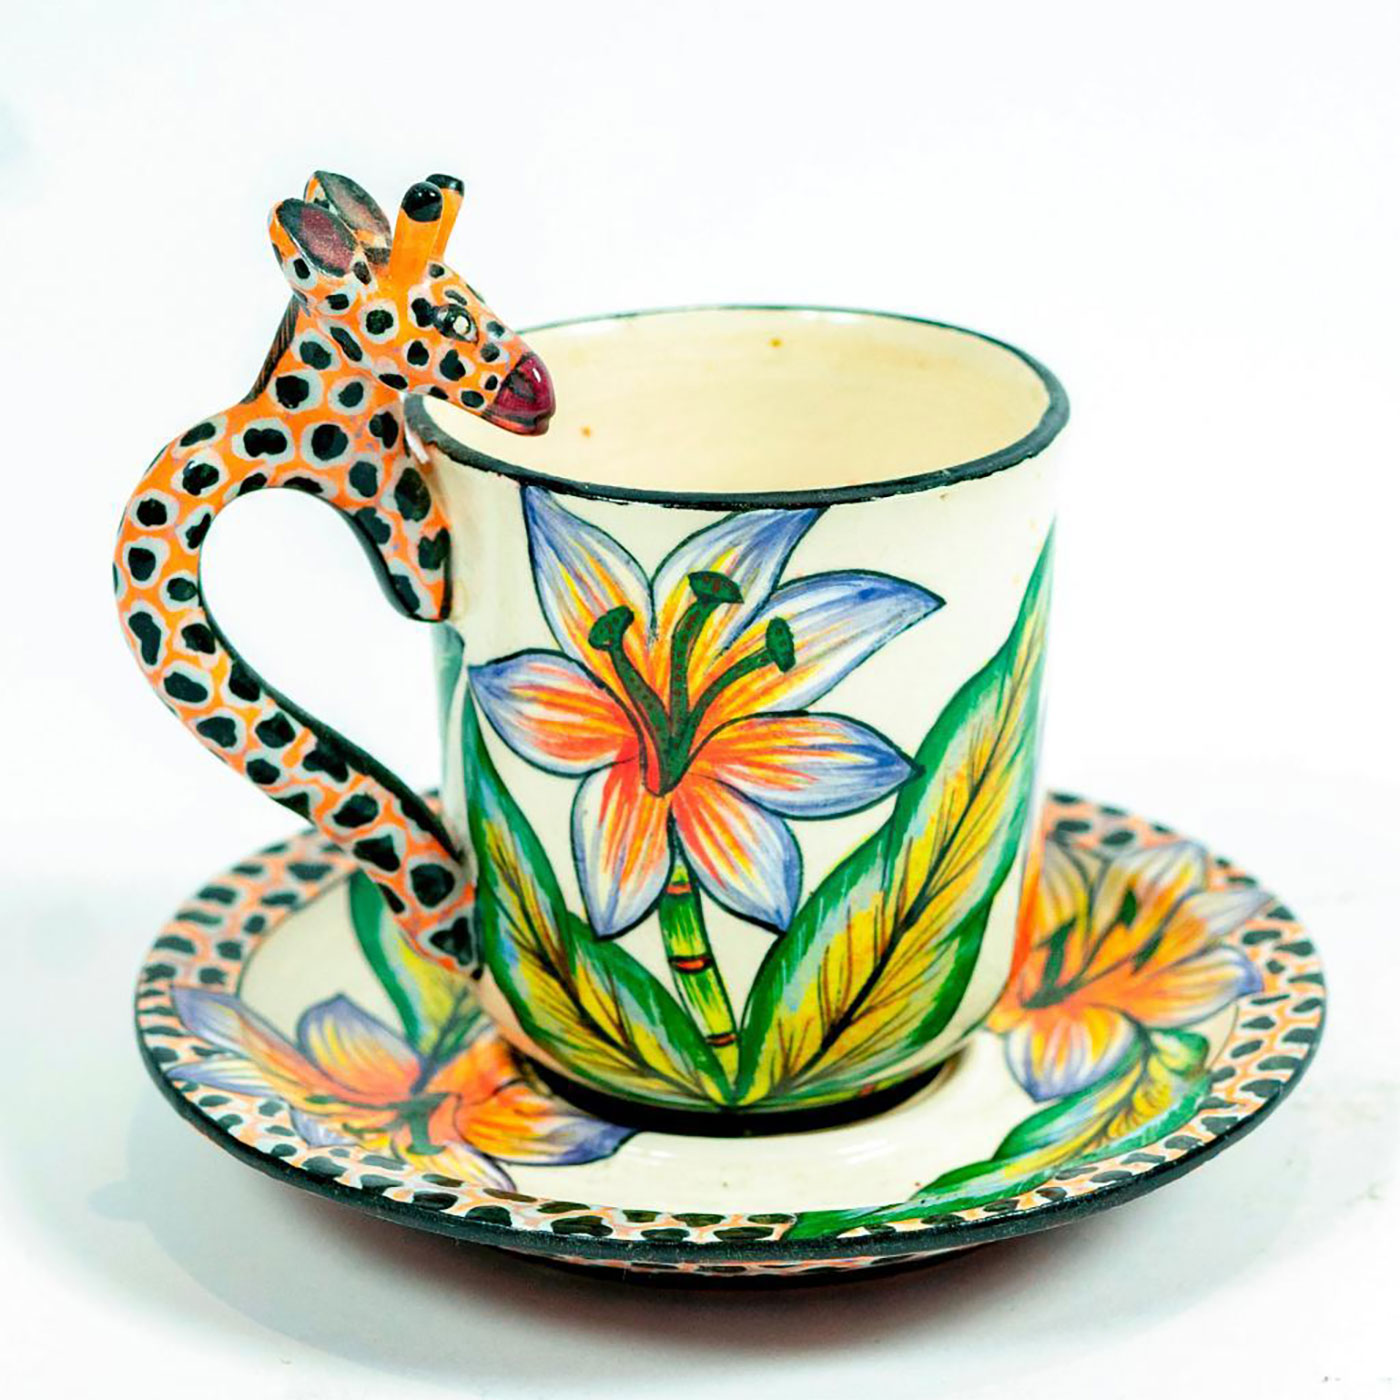 Ardmore Studio Espresso Cup and Saucer - Image 4 of 6